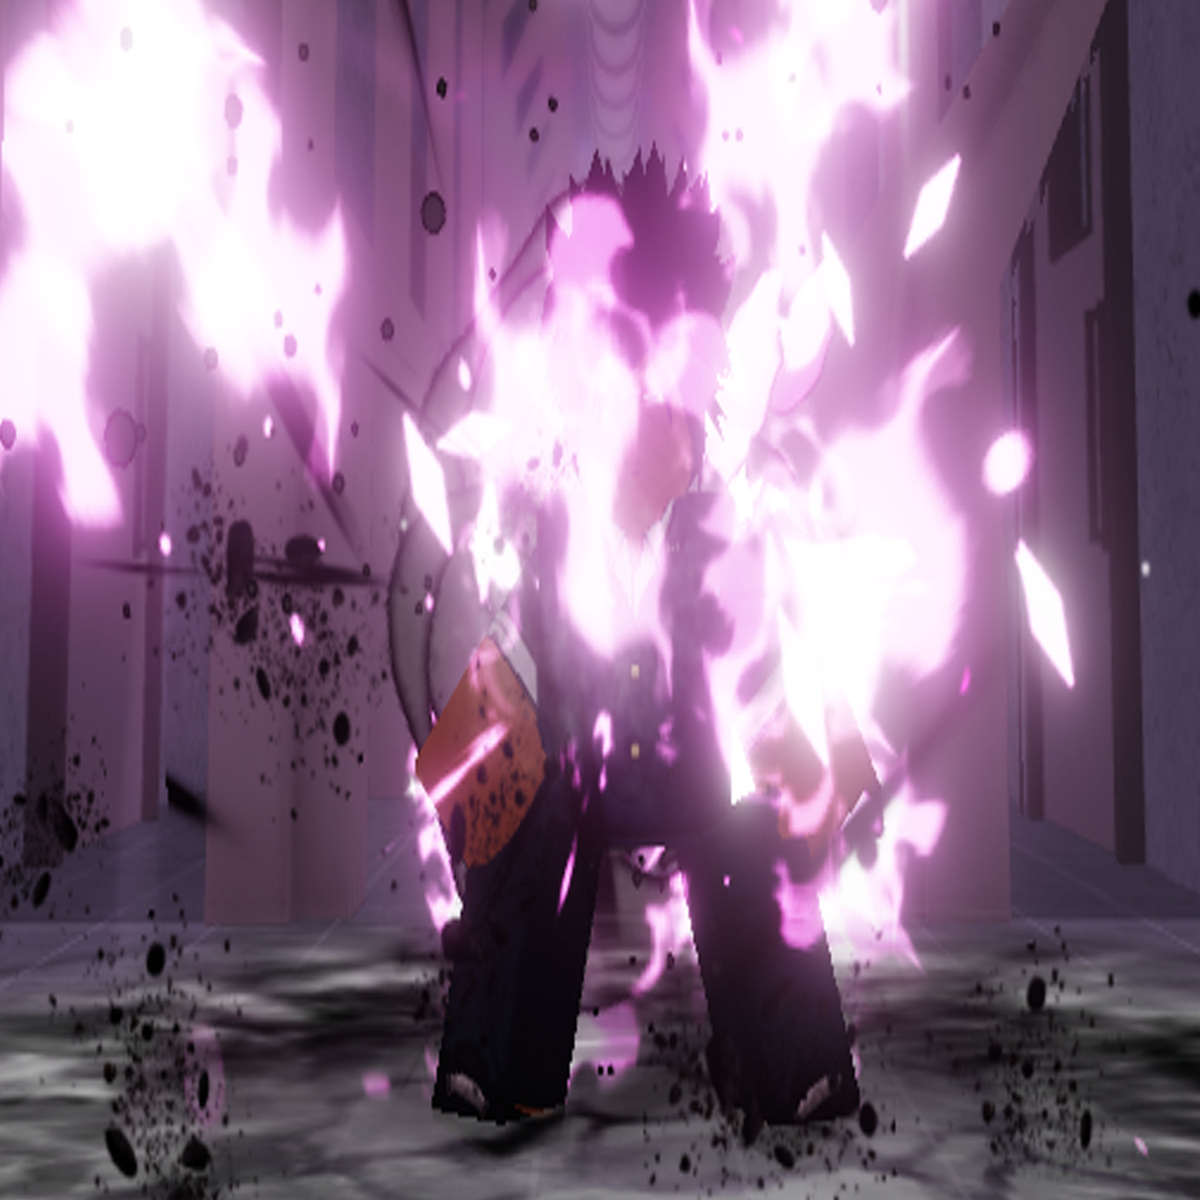 The NEW Fire Force Anime Game just RELEASED on Roblox! 